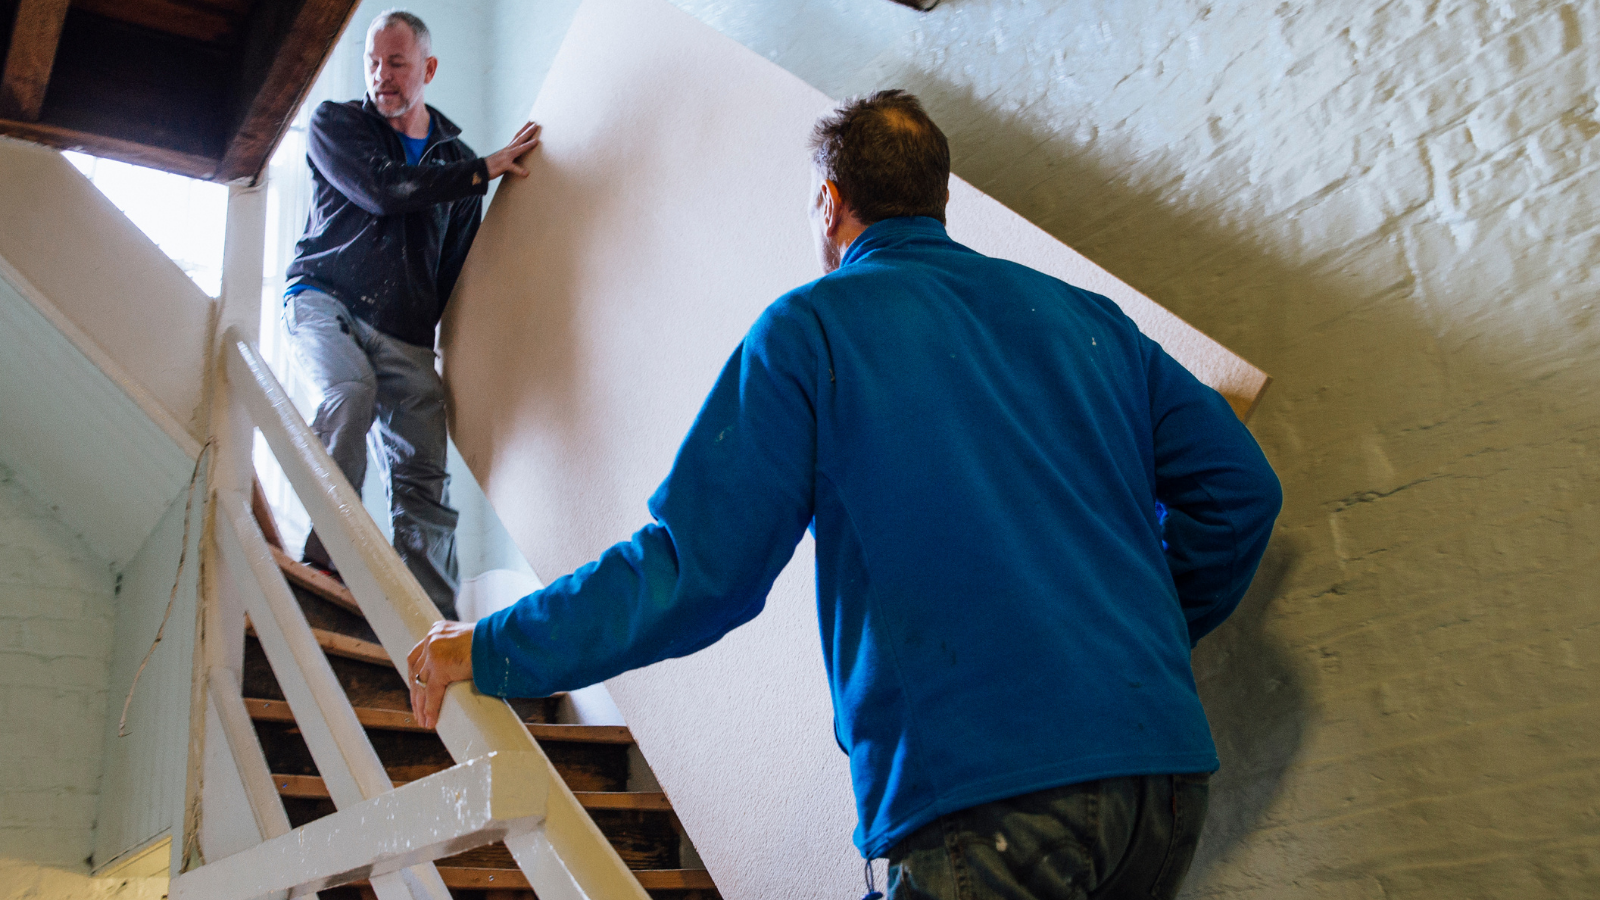 Two men are carefully moving a wooden furniture item up a tight staircase. 